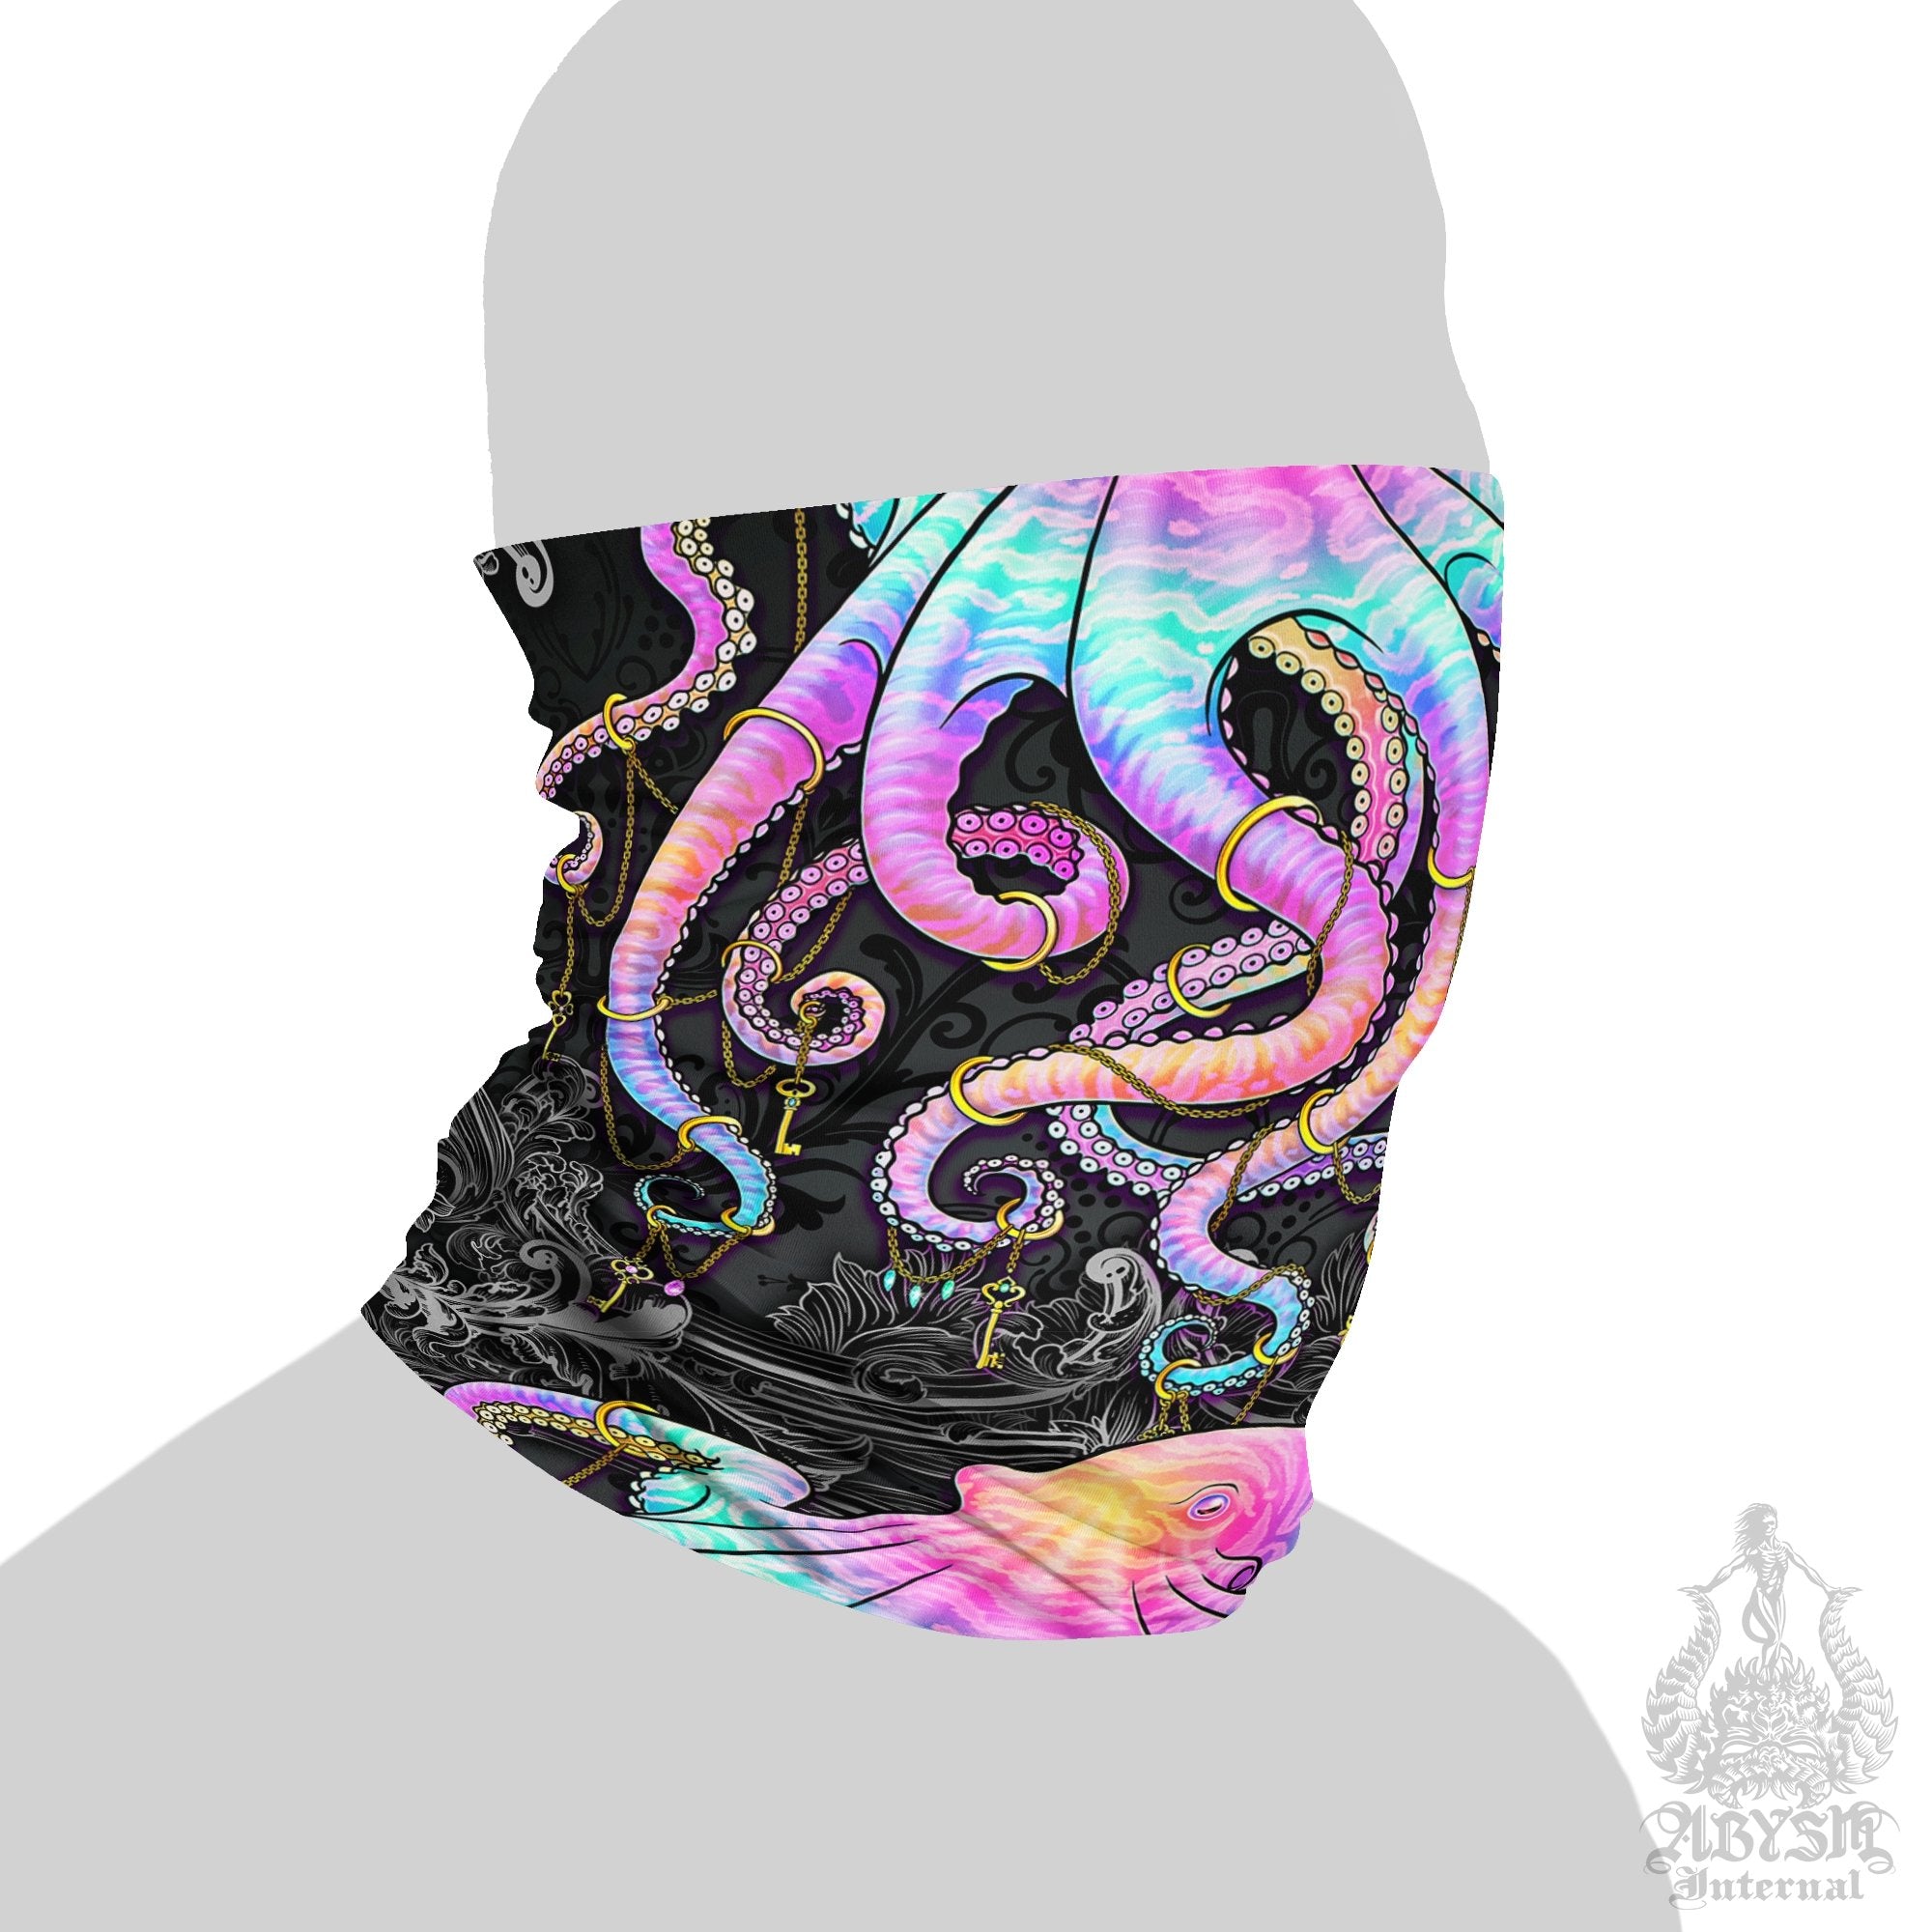 Rave Neck Gaiter, Face Mask, Head Covering, Rave Outfit, Psychedelic Beach Festival, Octopus Art - Aesthetic, Pastel Punk Dark - Abysm Internal